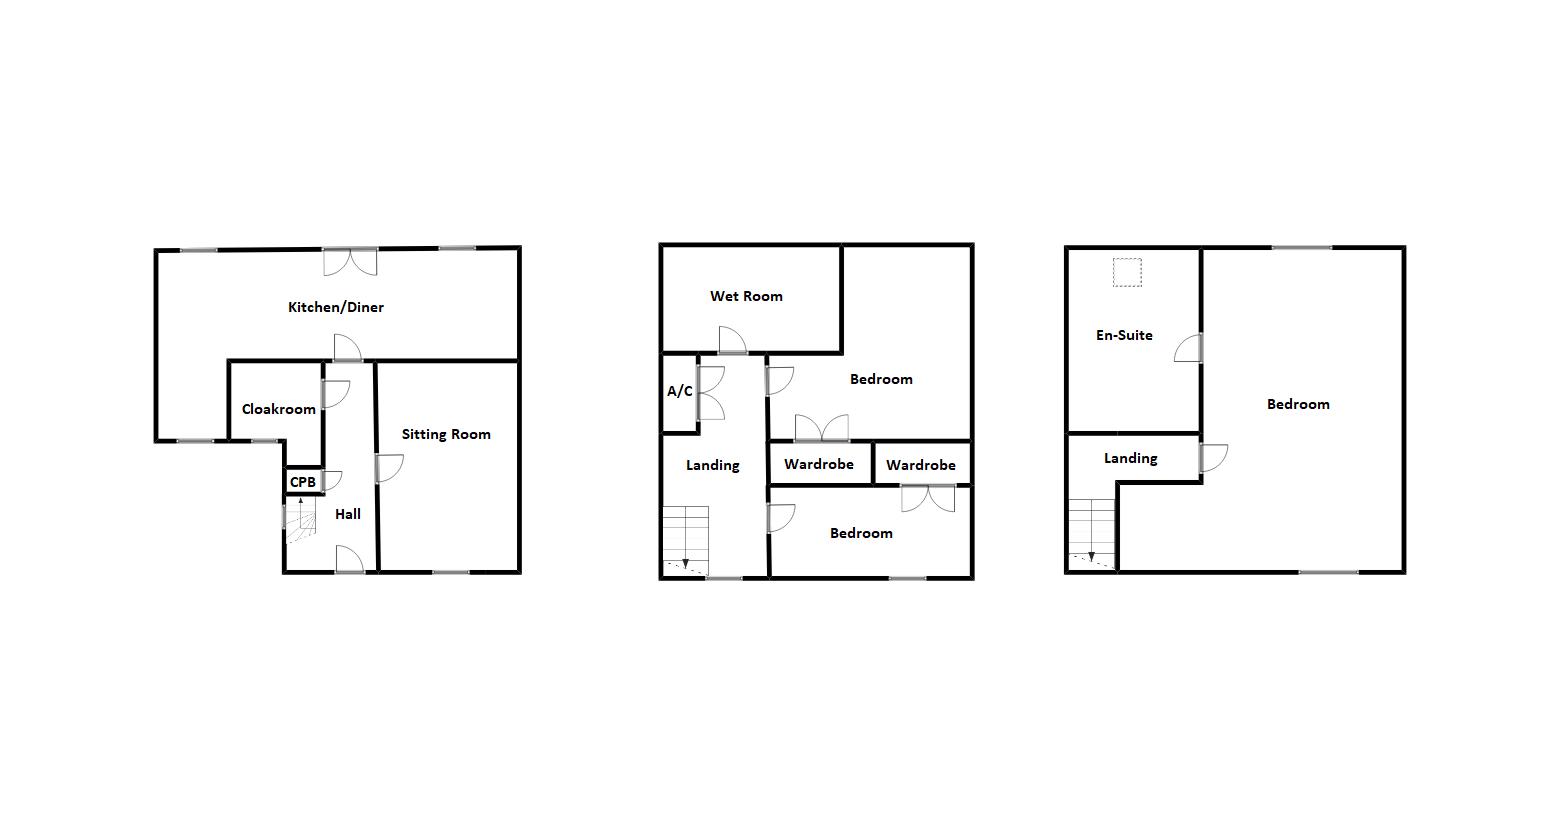 3 bed to rent in North Street, South Petherton - Property floorplan